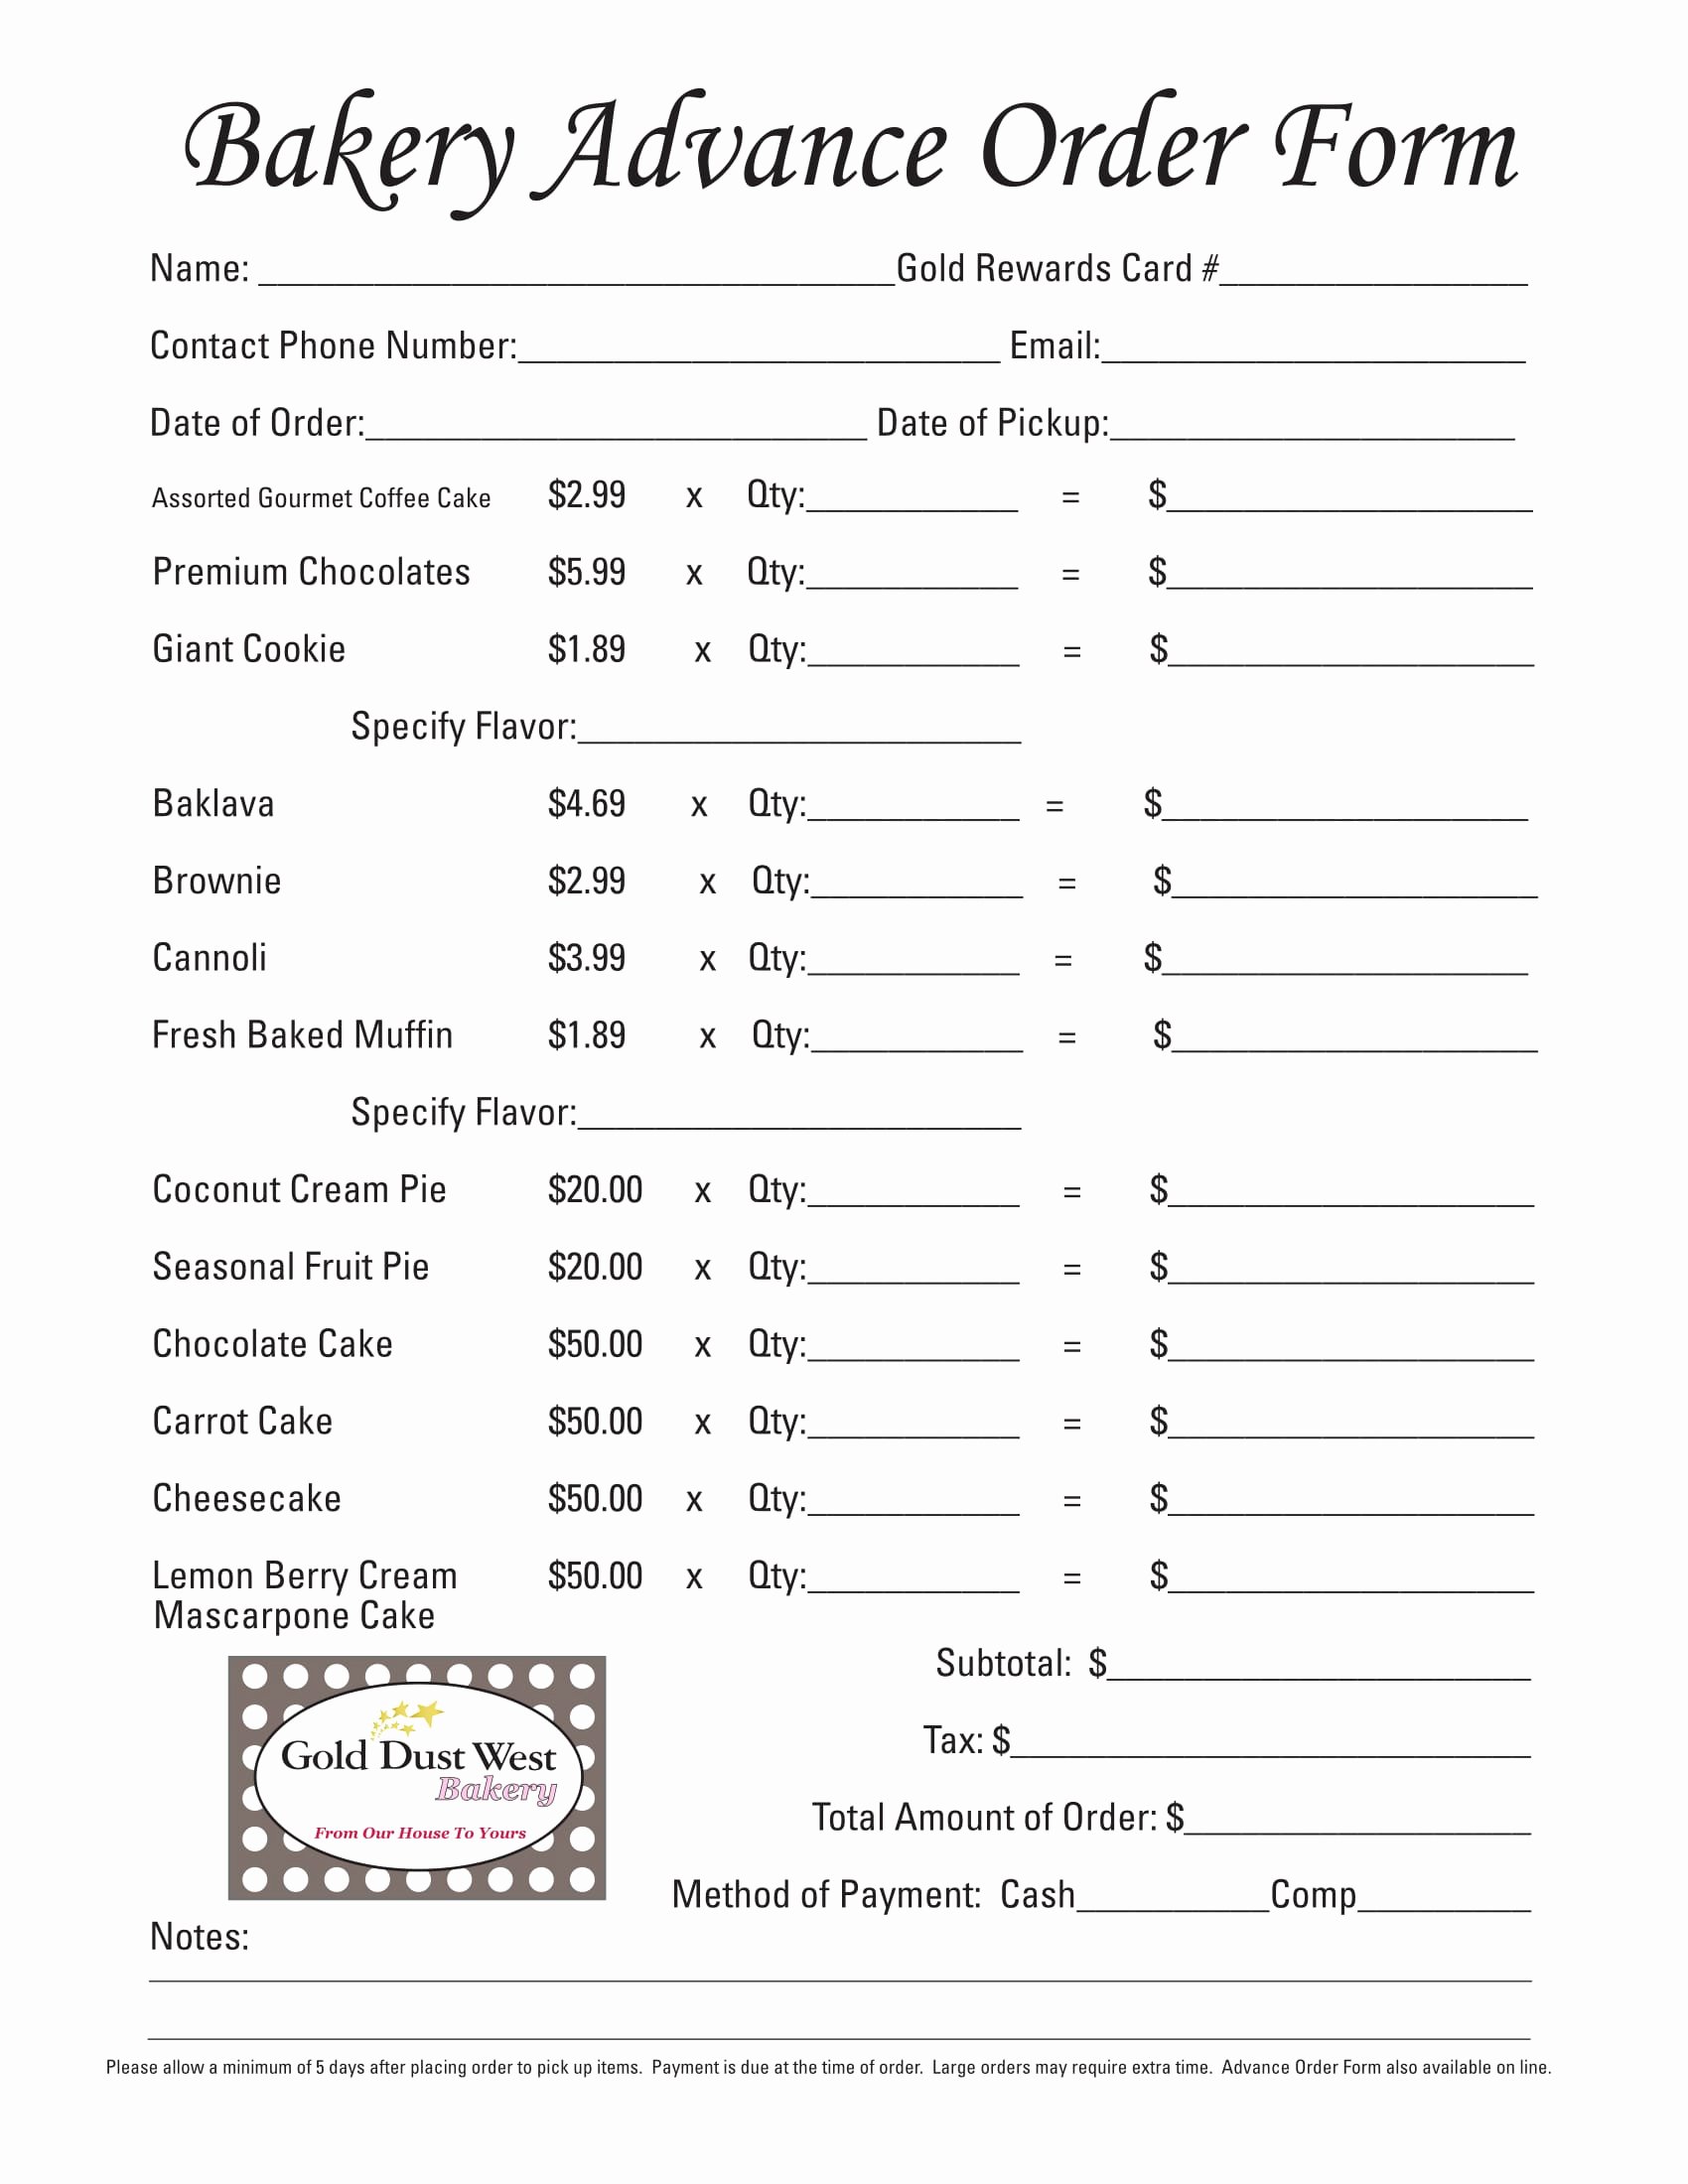 Special order form Template Luxury Free 14 Bakery order forms